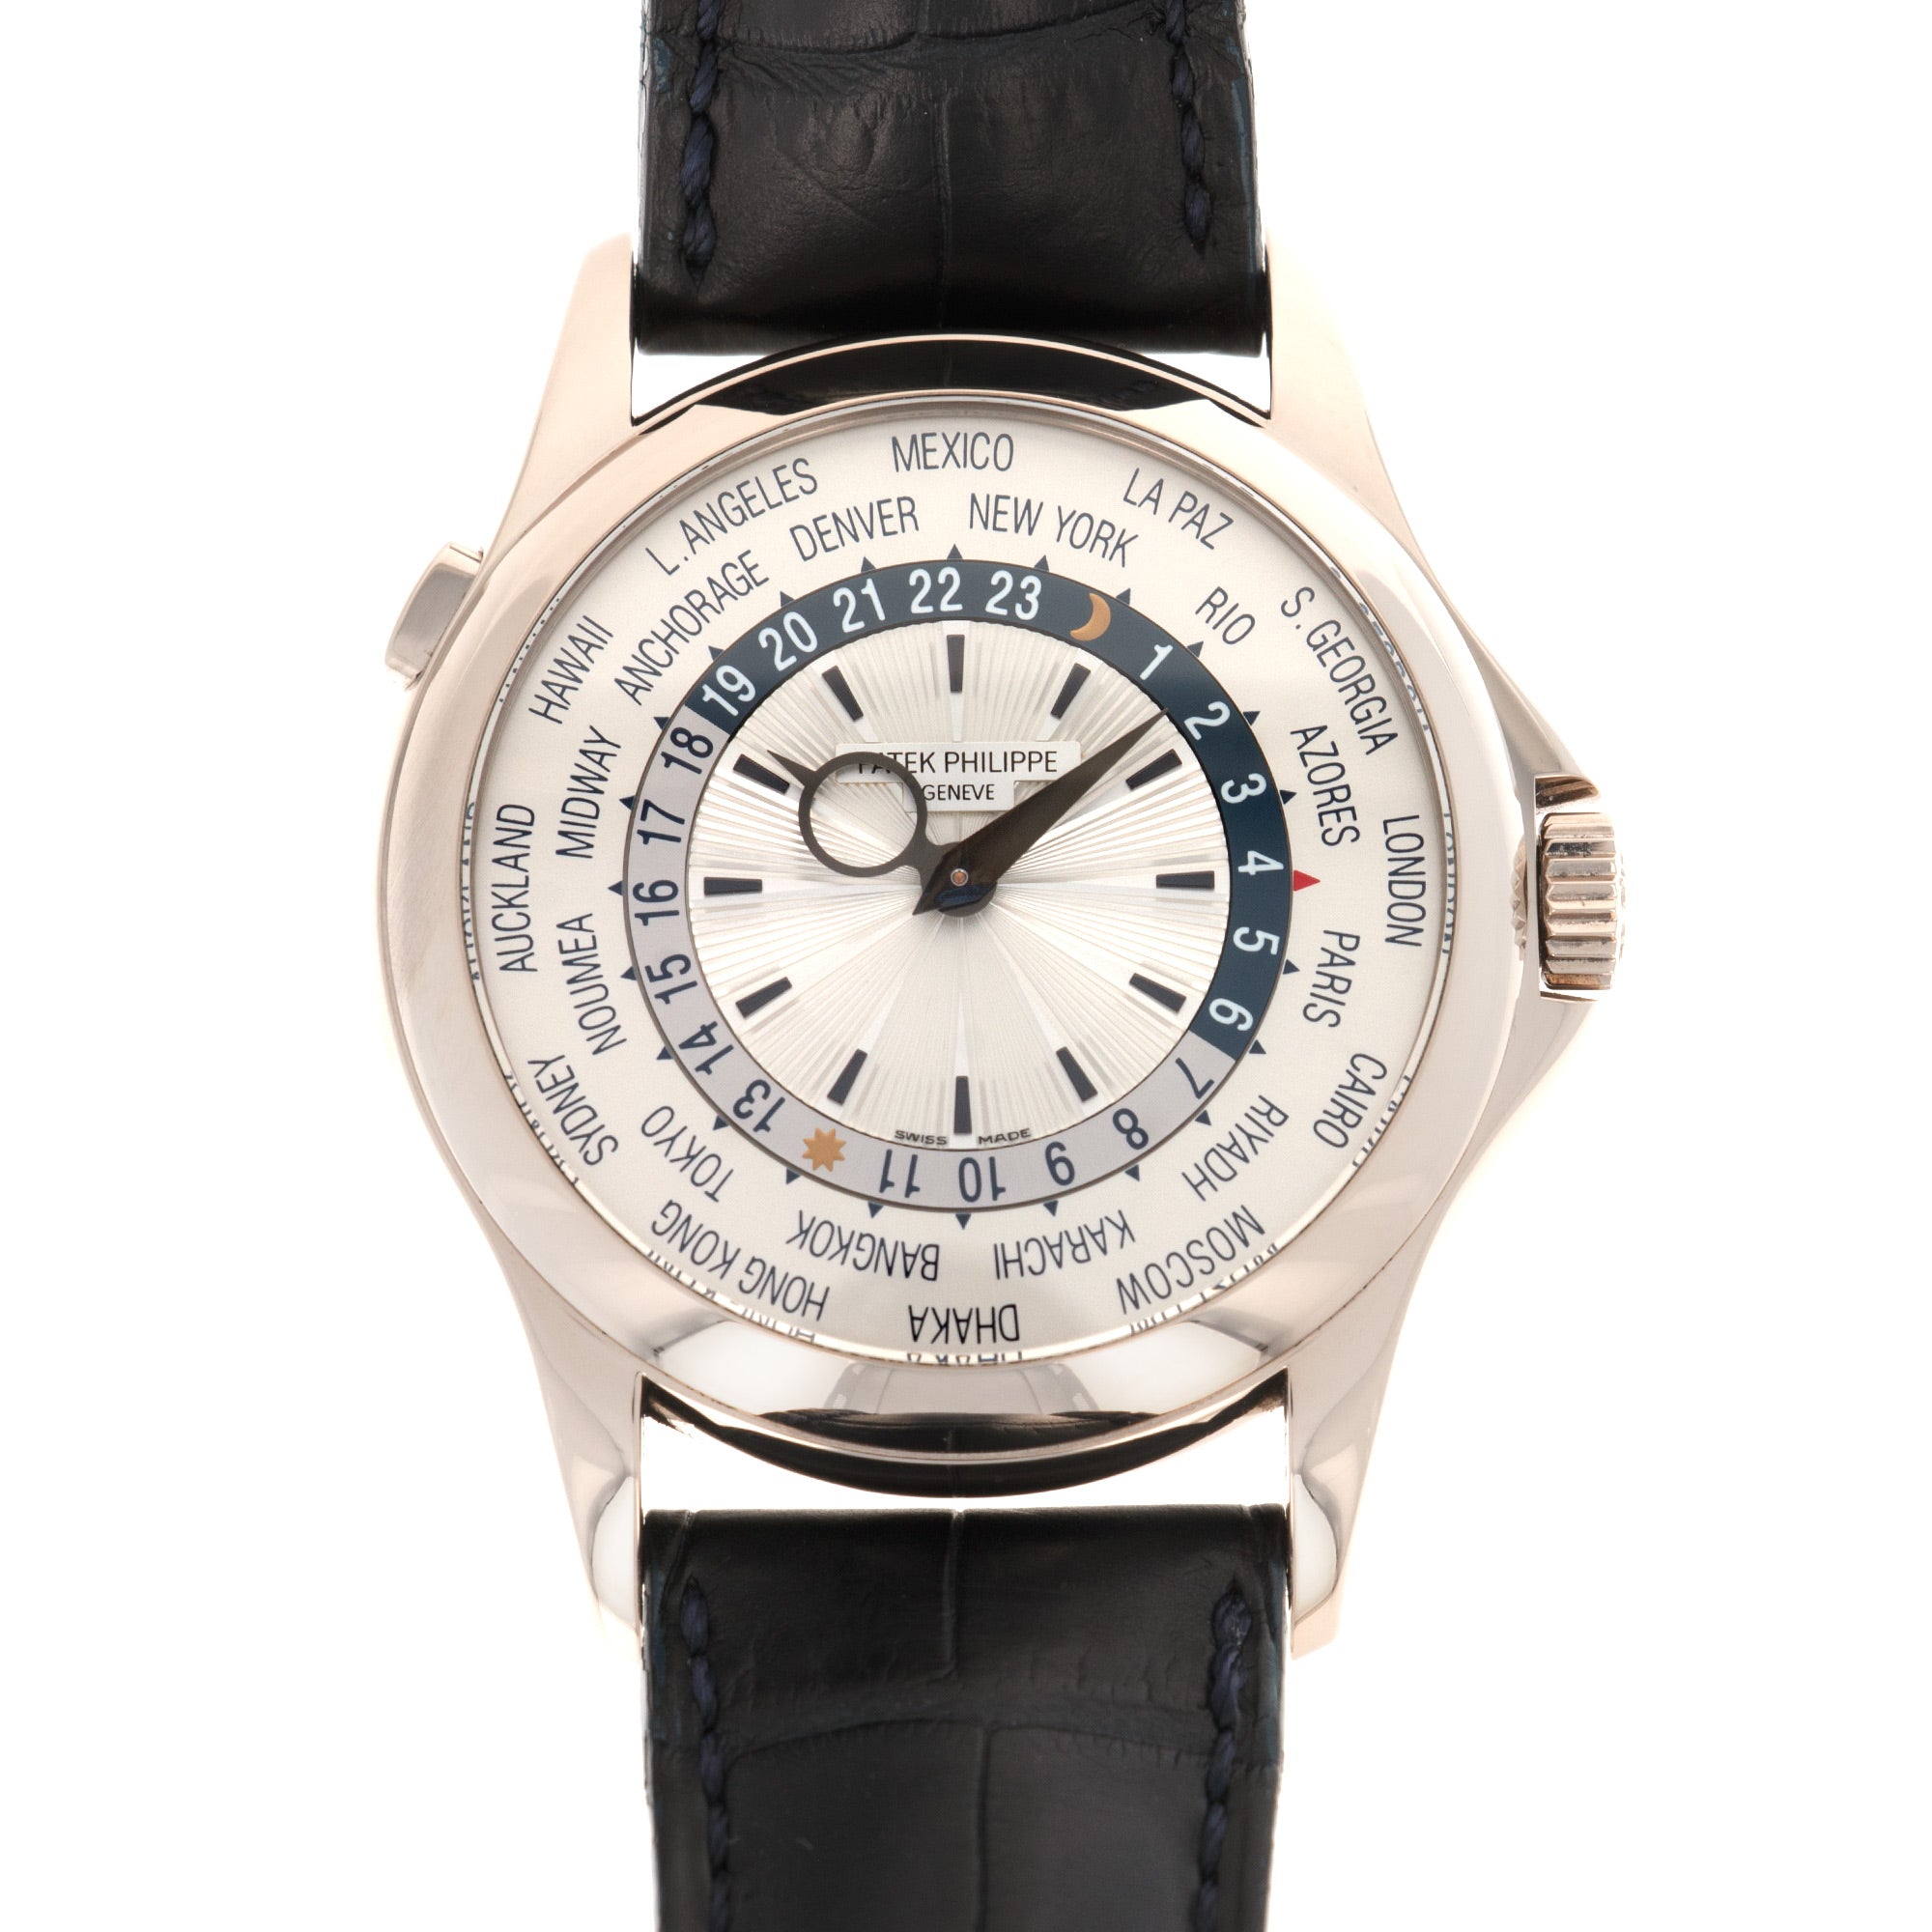 Patek Philippe - Patek Philippe White Gold World Time Watch Ref. 5130, Retailed by Tiffany & Co. - The Keystone Watches